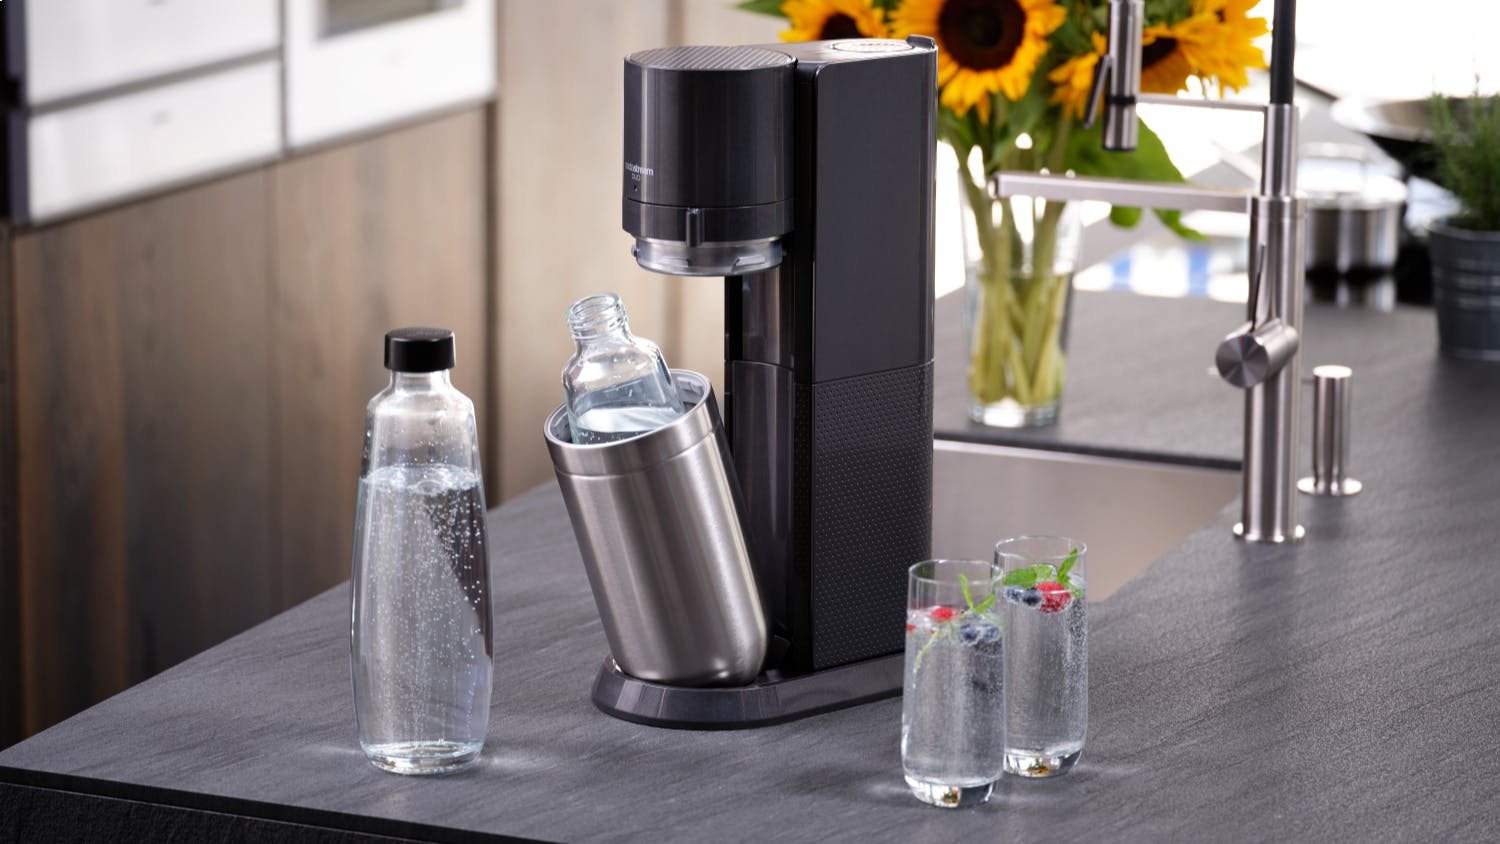 SodaStream Duo Sparkling Water Maker with 4 x 1L Bottles & 60L CO2 Cylinder